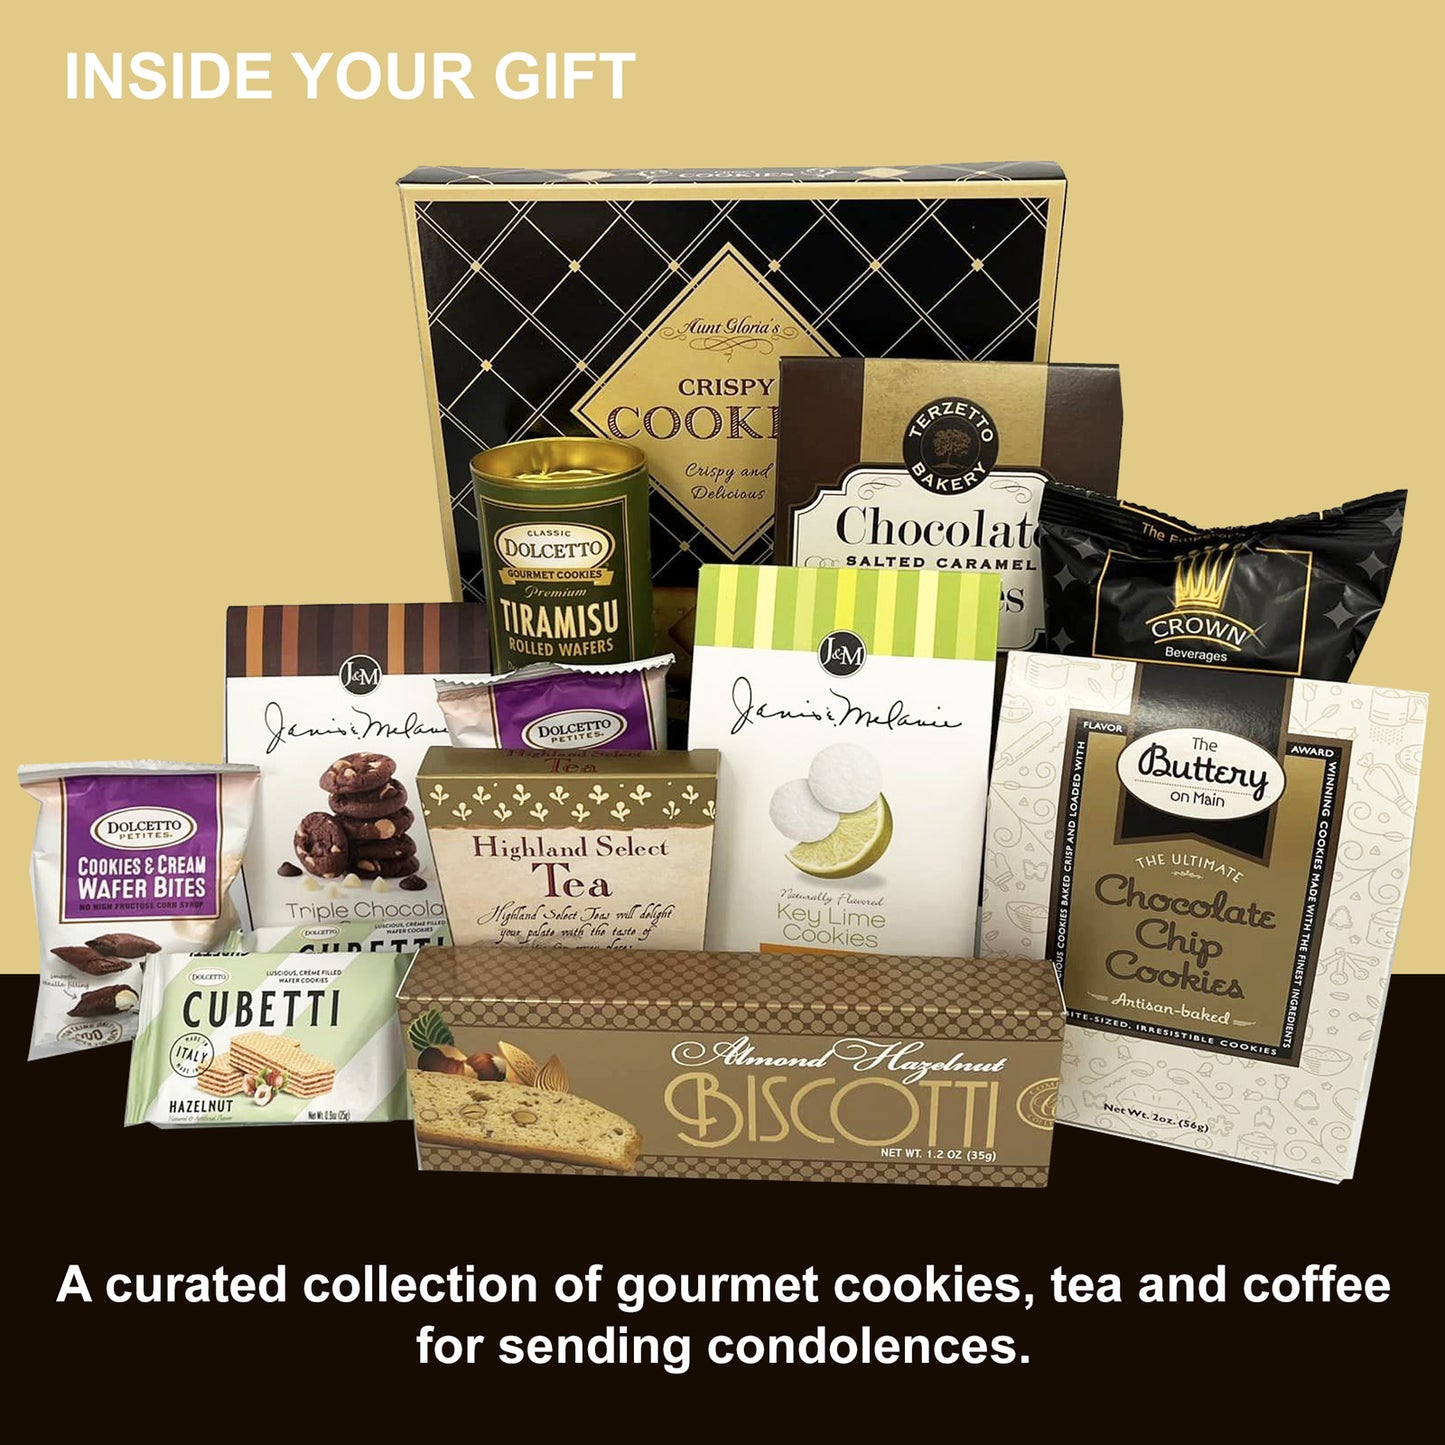 Gourmet Sympathy Gift Basket with Cookies and Tea for Sending Condolences